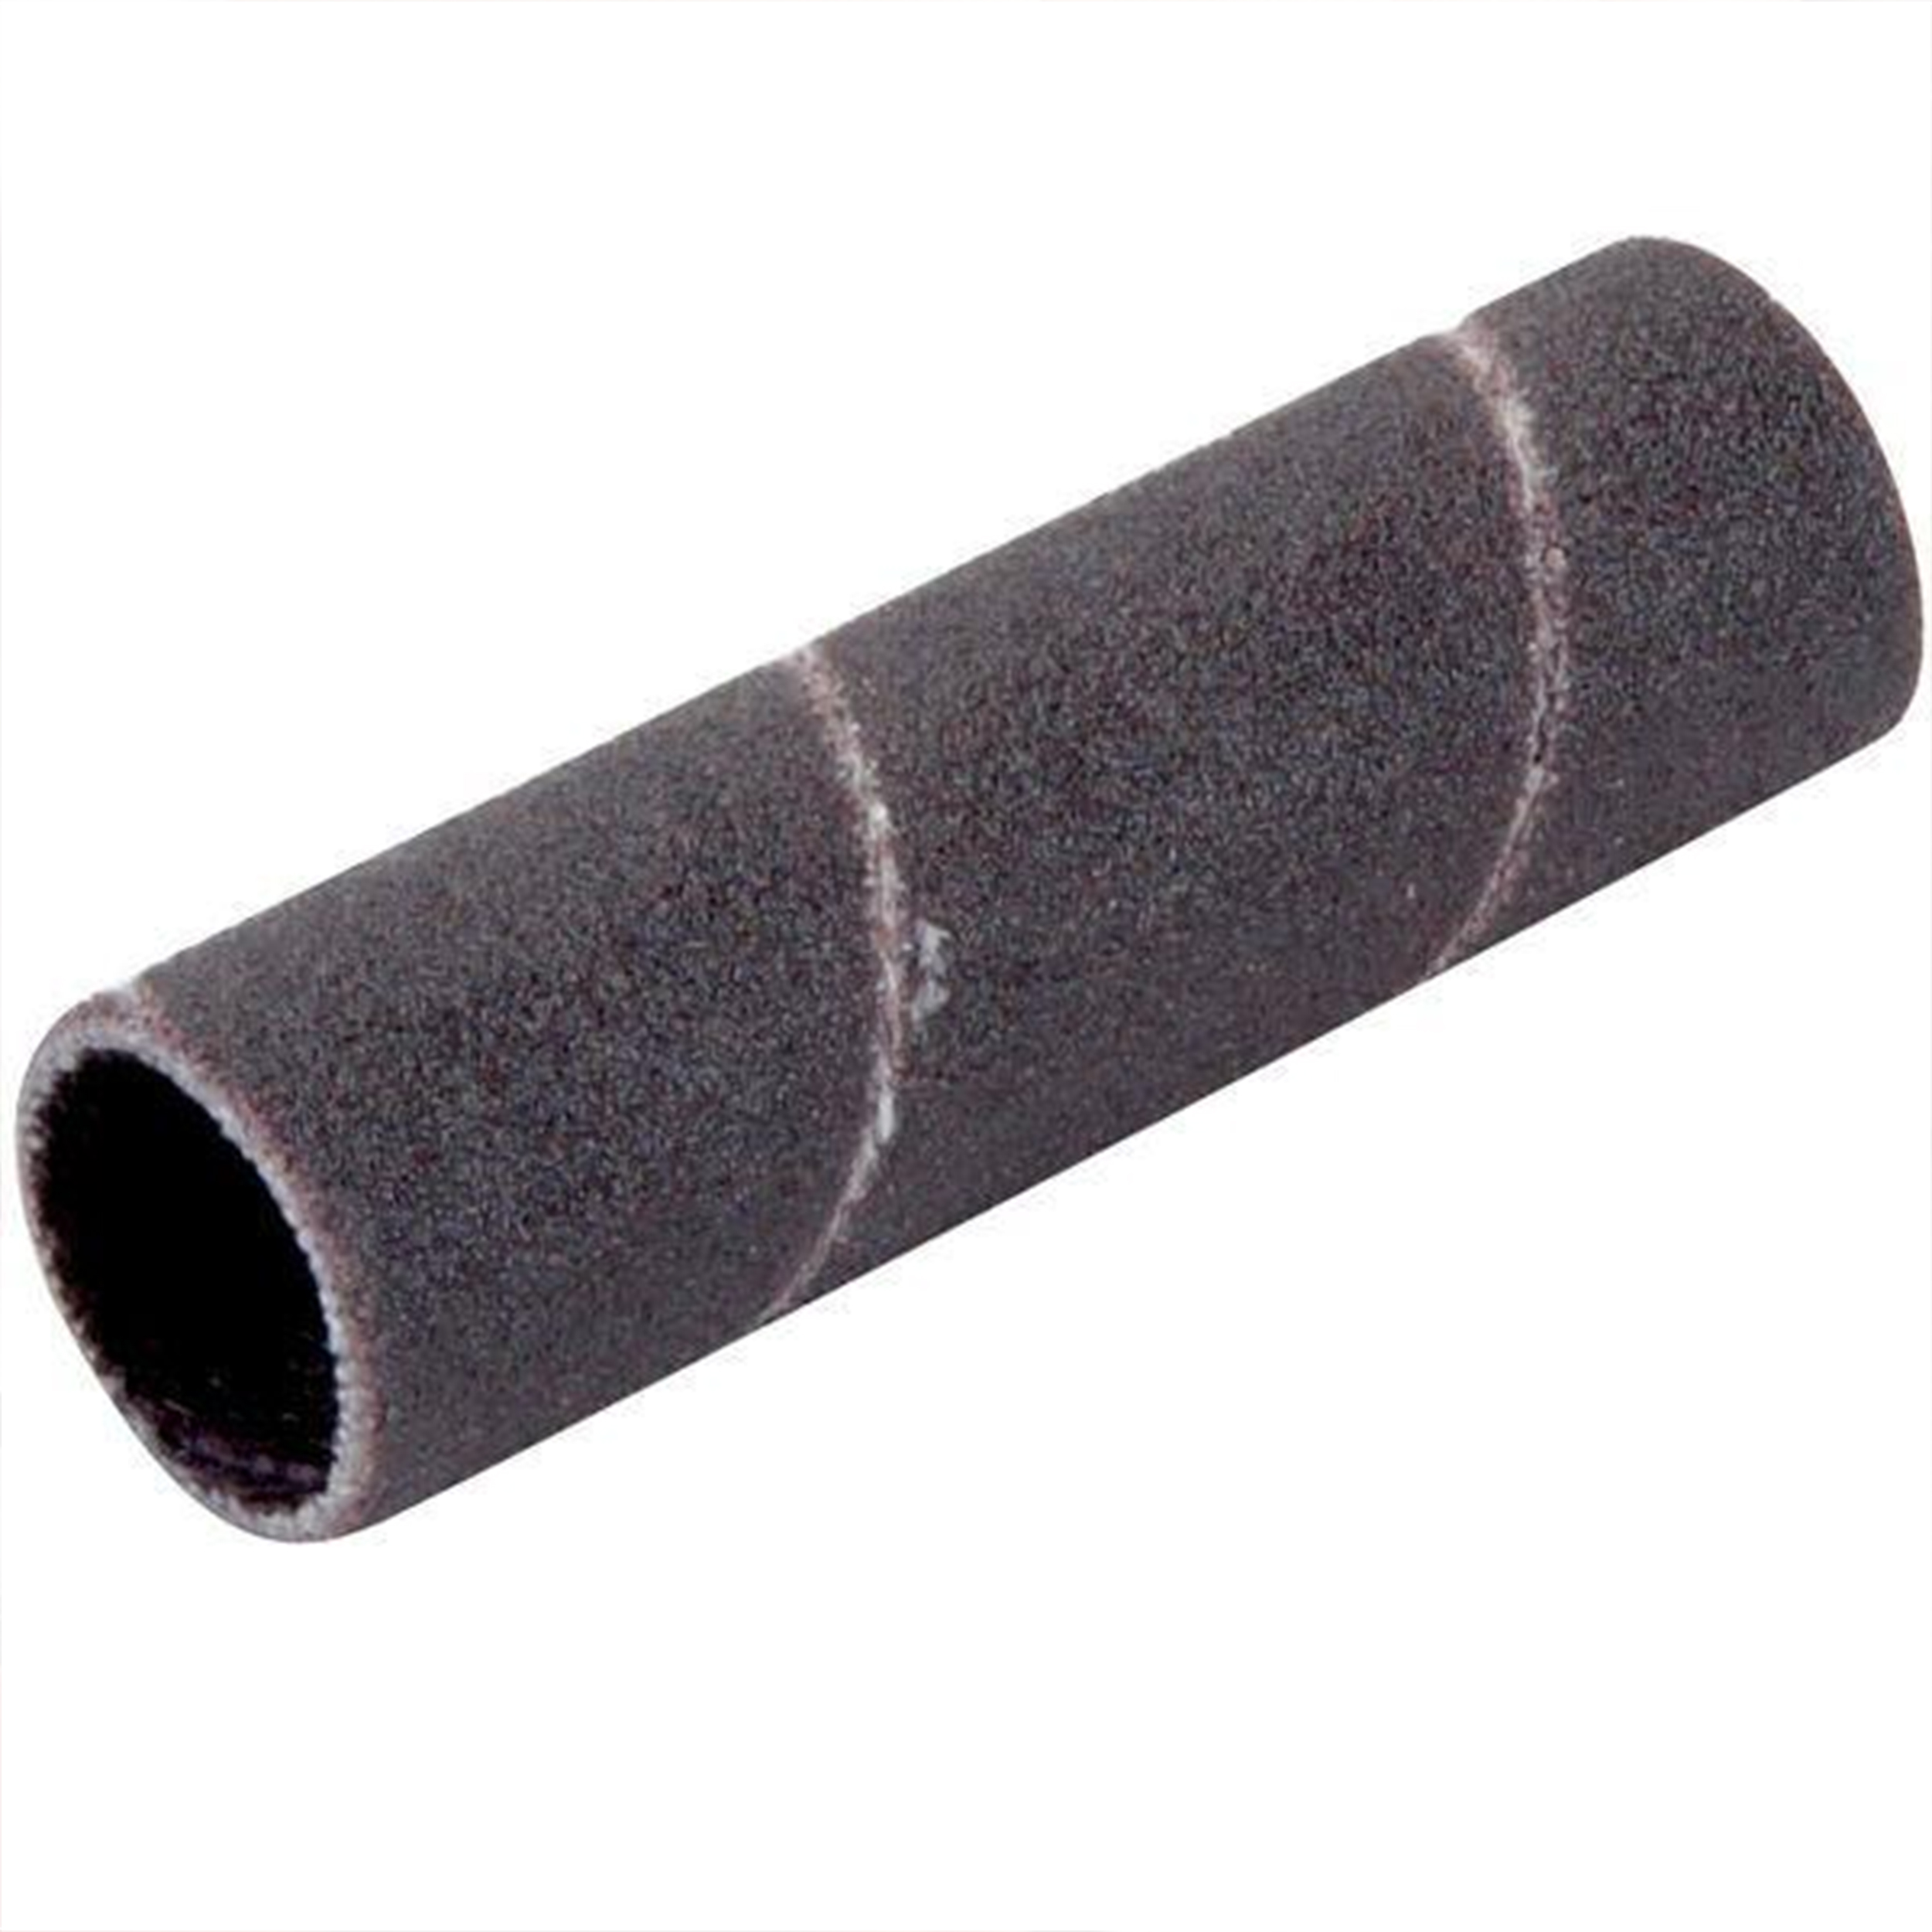 Sanding Drum Replacement Sleeve, 1/2" Dia. X 2" Length, 50 Grit, 12 Pack